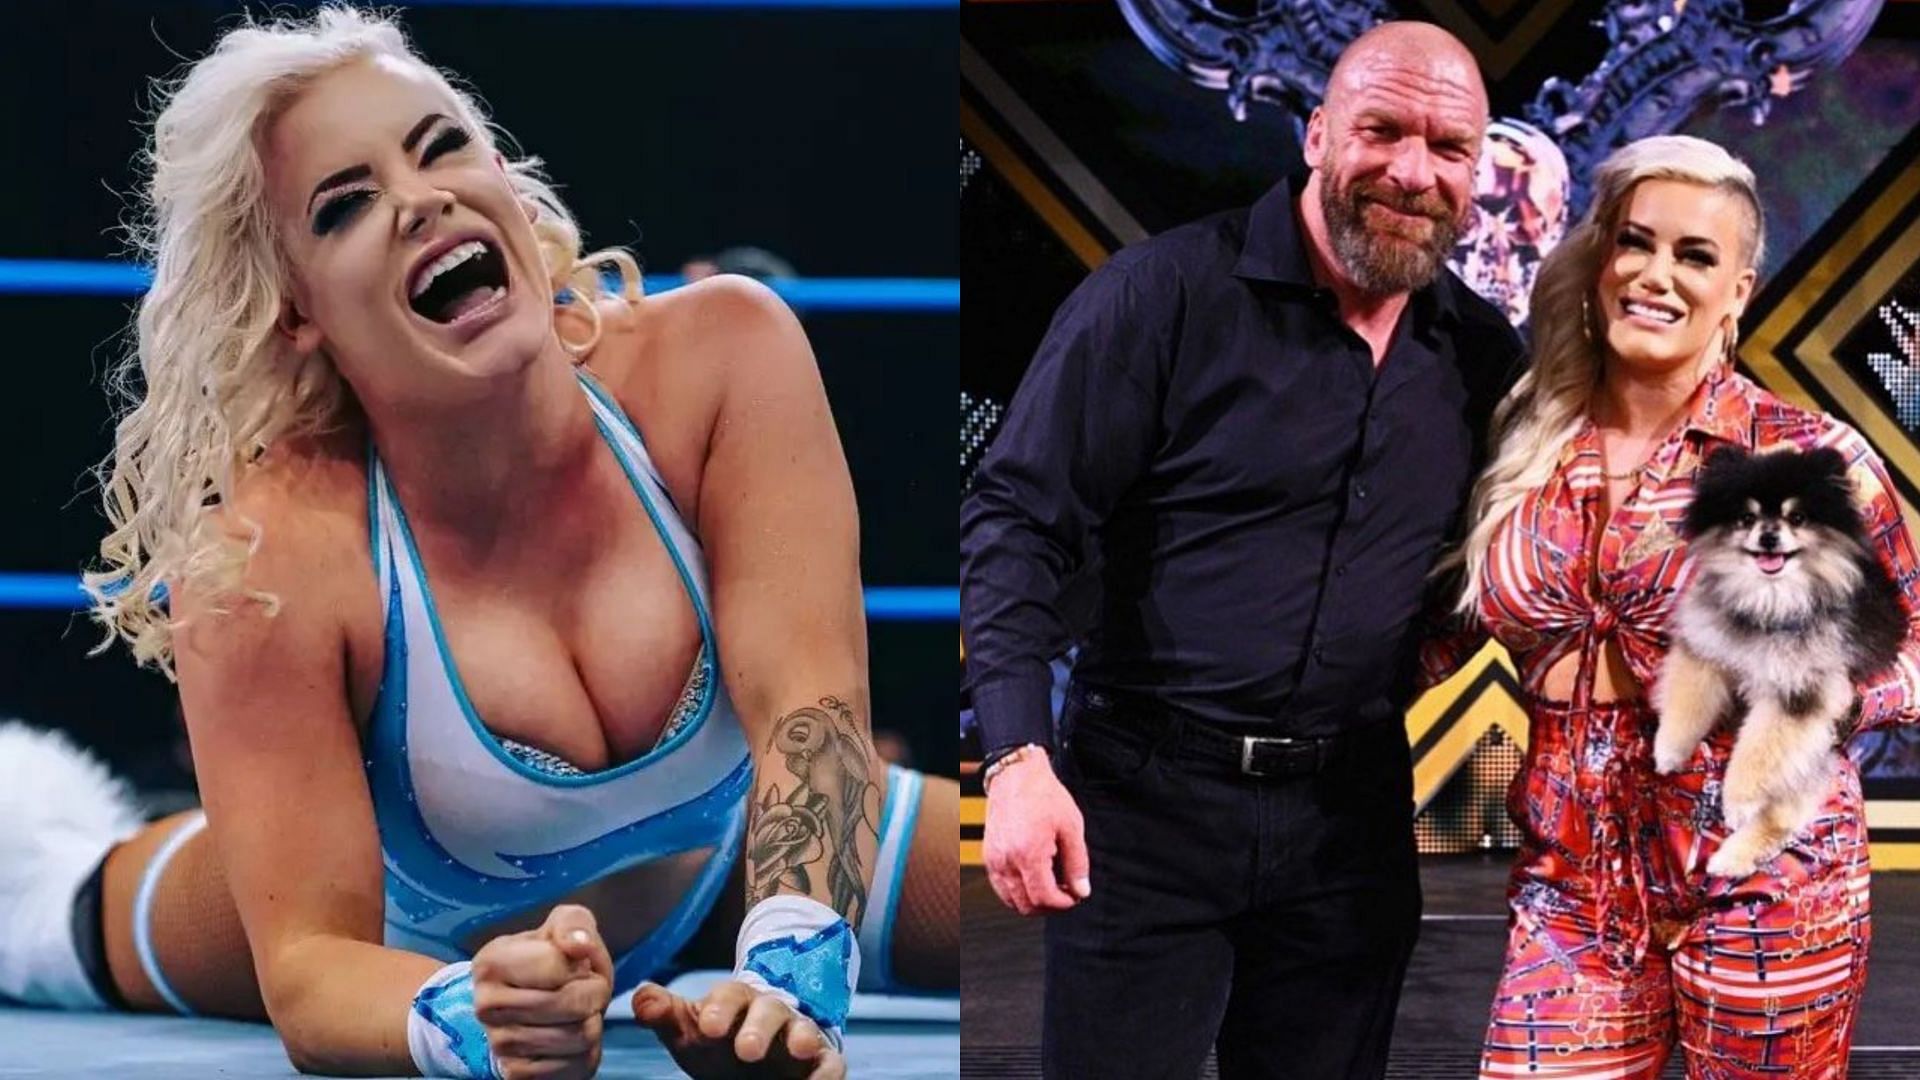 WWE released Taya Valkyrie from her contract in November 2021